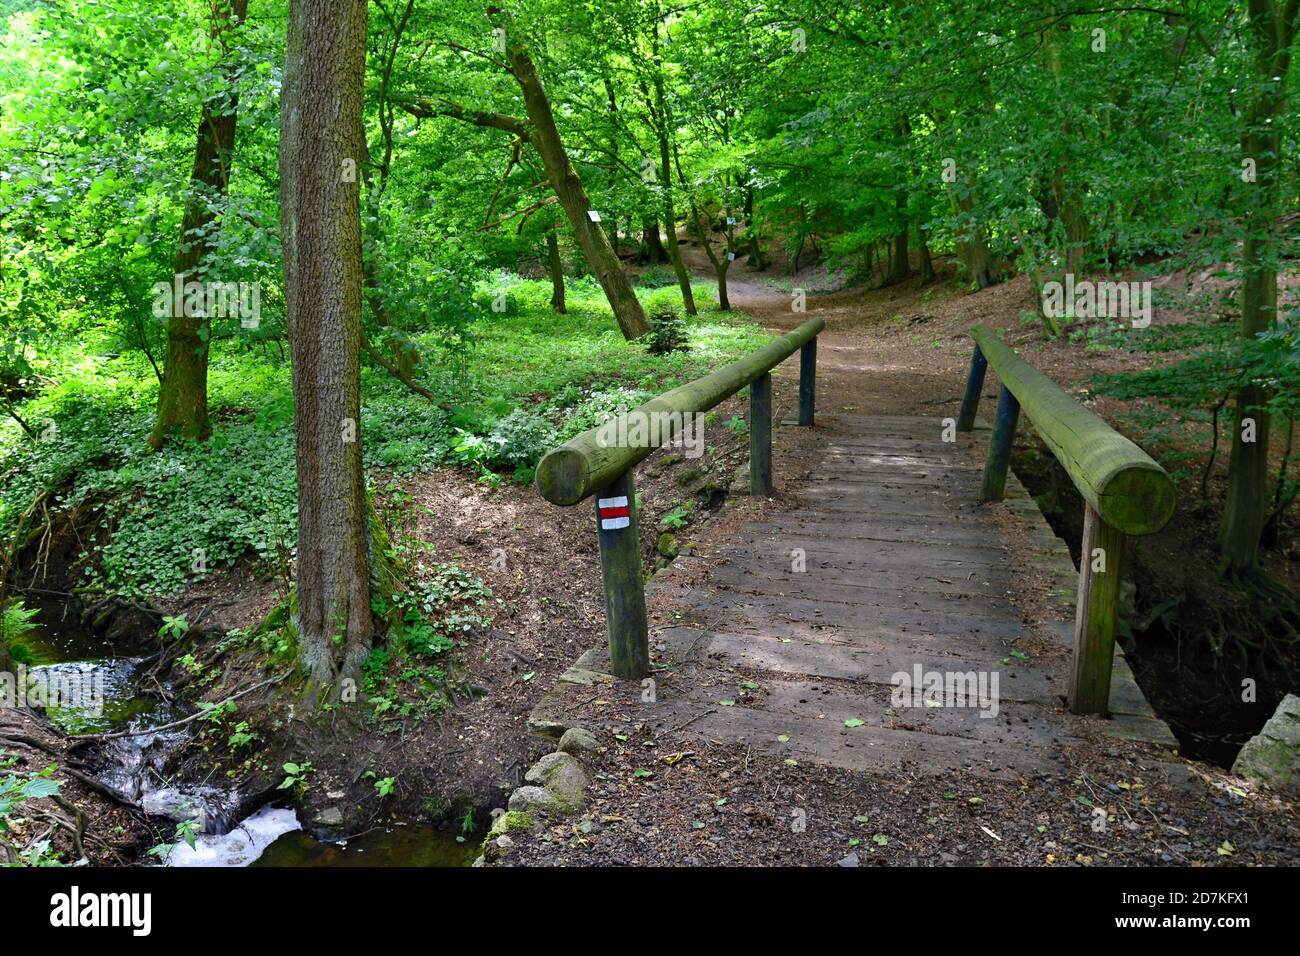 Forest still life with wooden bridge over a stream. Romantic view of nature and the old wooden bridge. Ready for a walk. Stock Photo